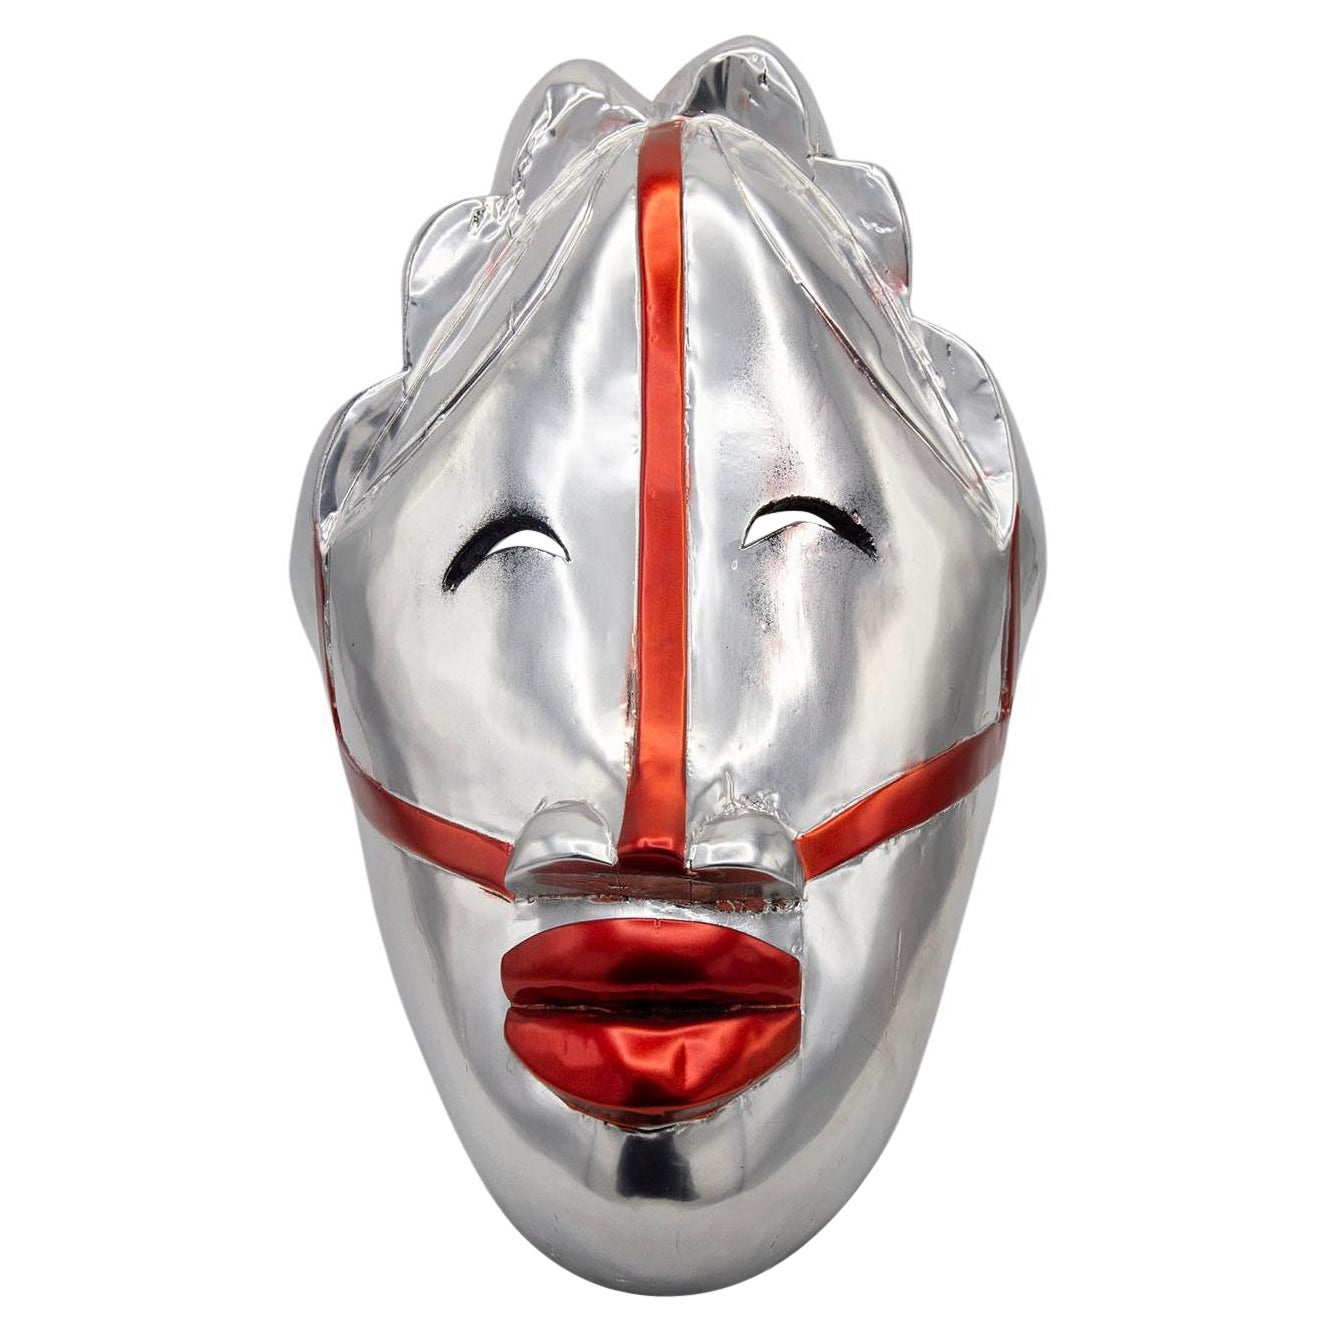 African Futurist Silver Mask Created by Bomber Bax For Sale